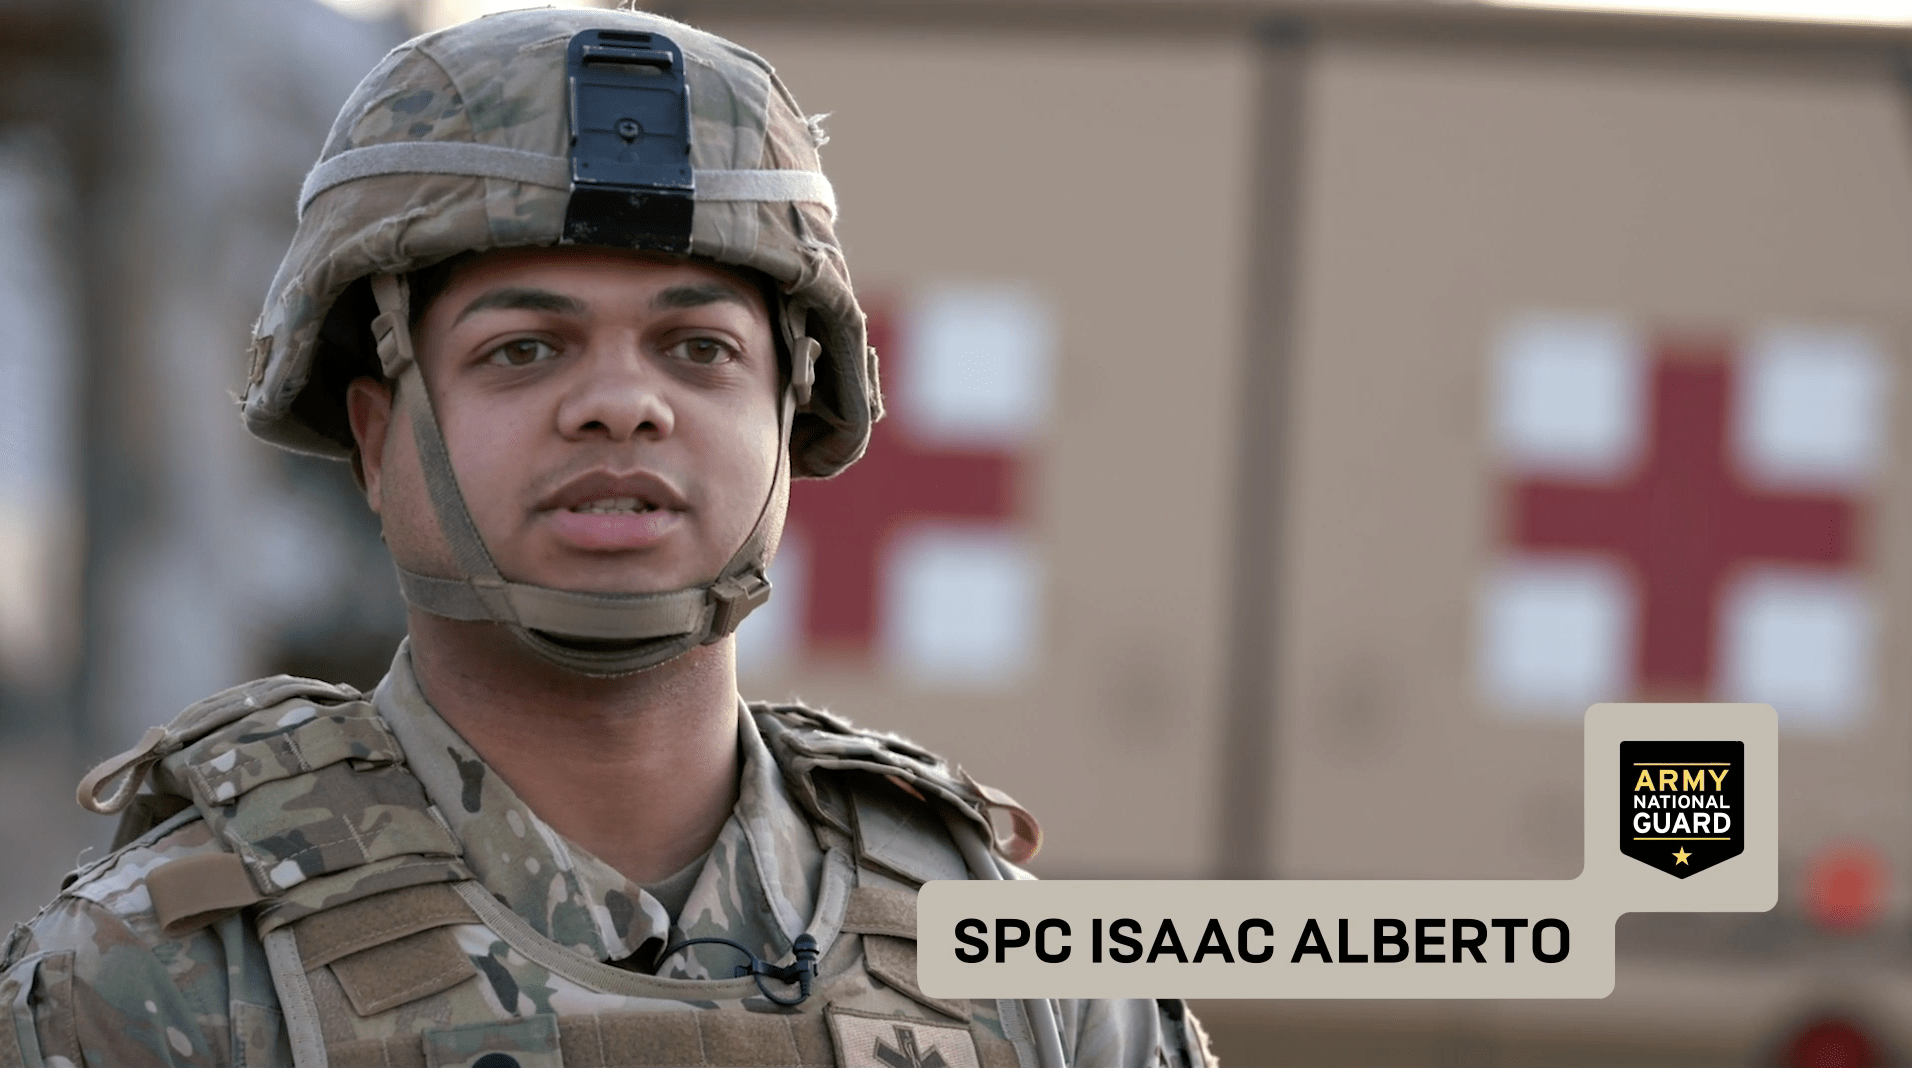 Behind the scenes of an Army National Guard photo shoot with SPC Isaac Alberto